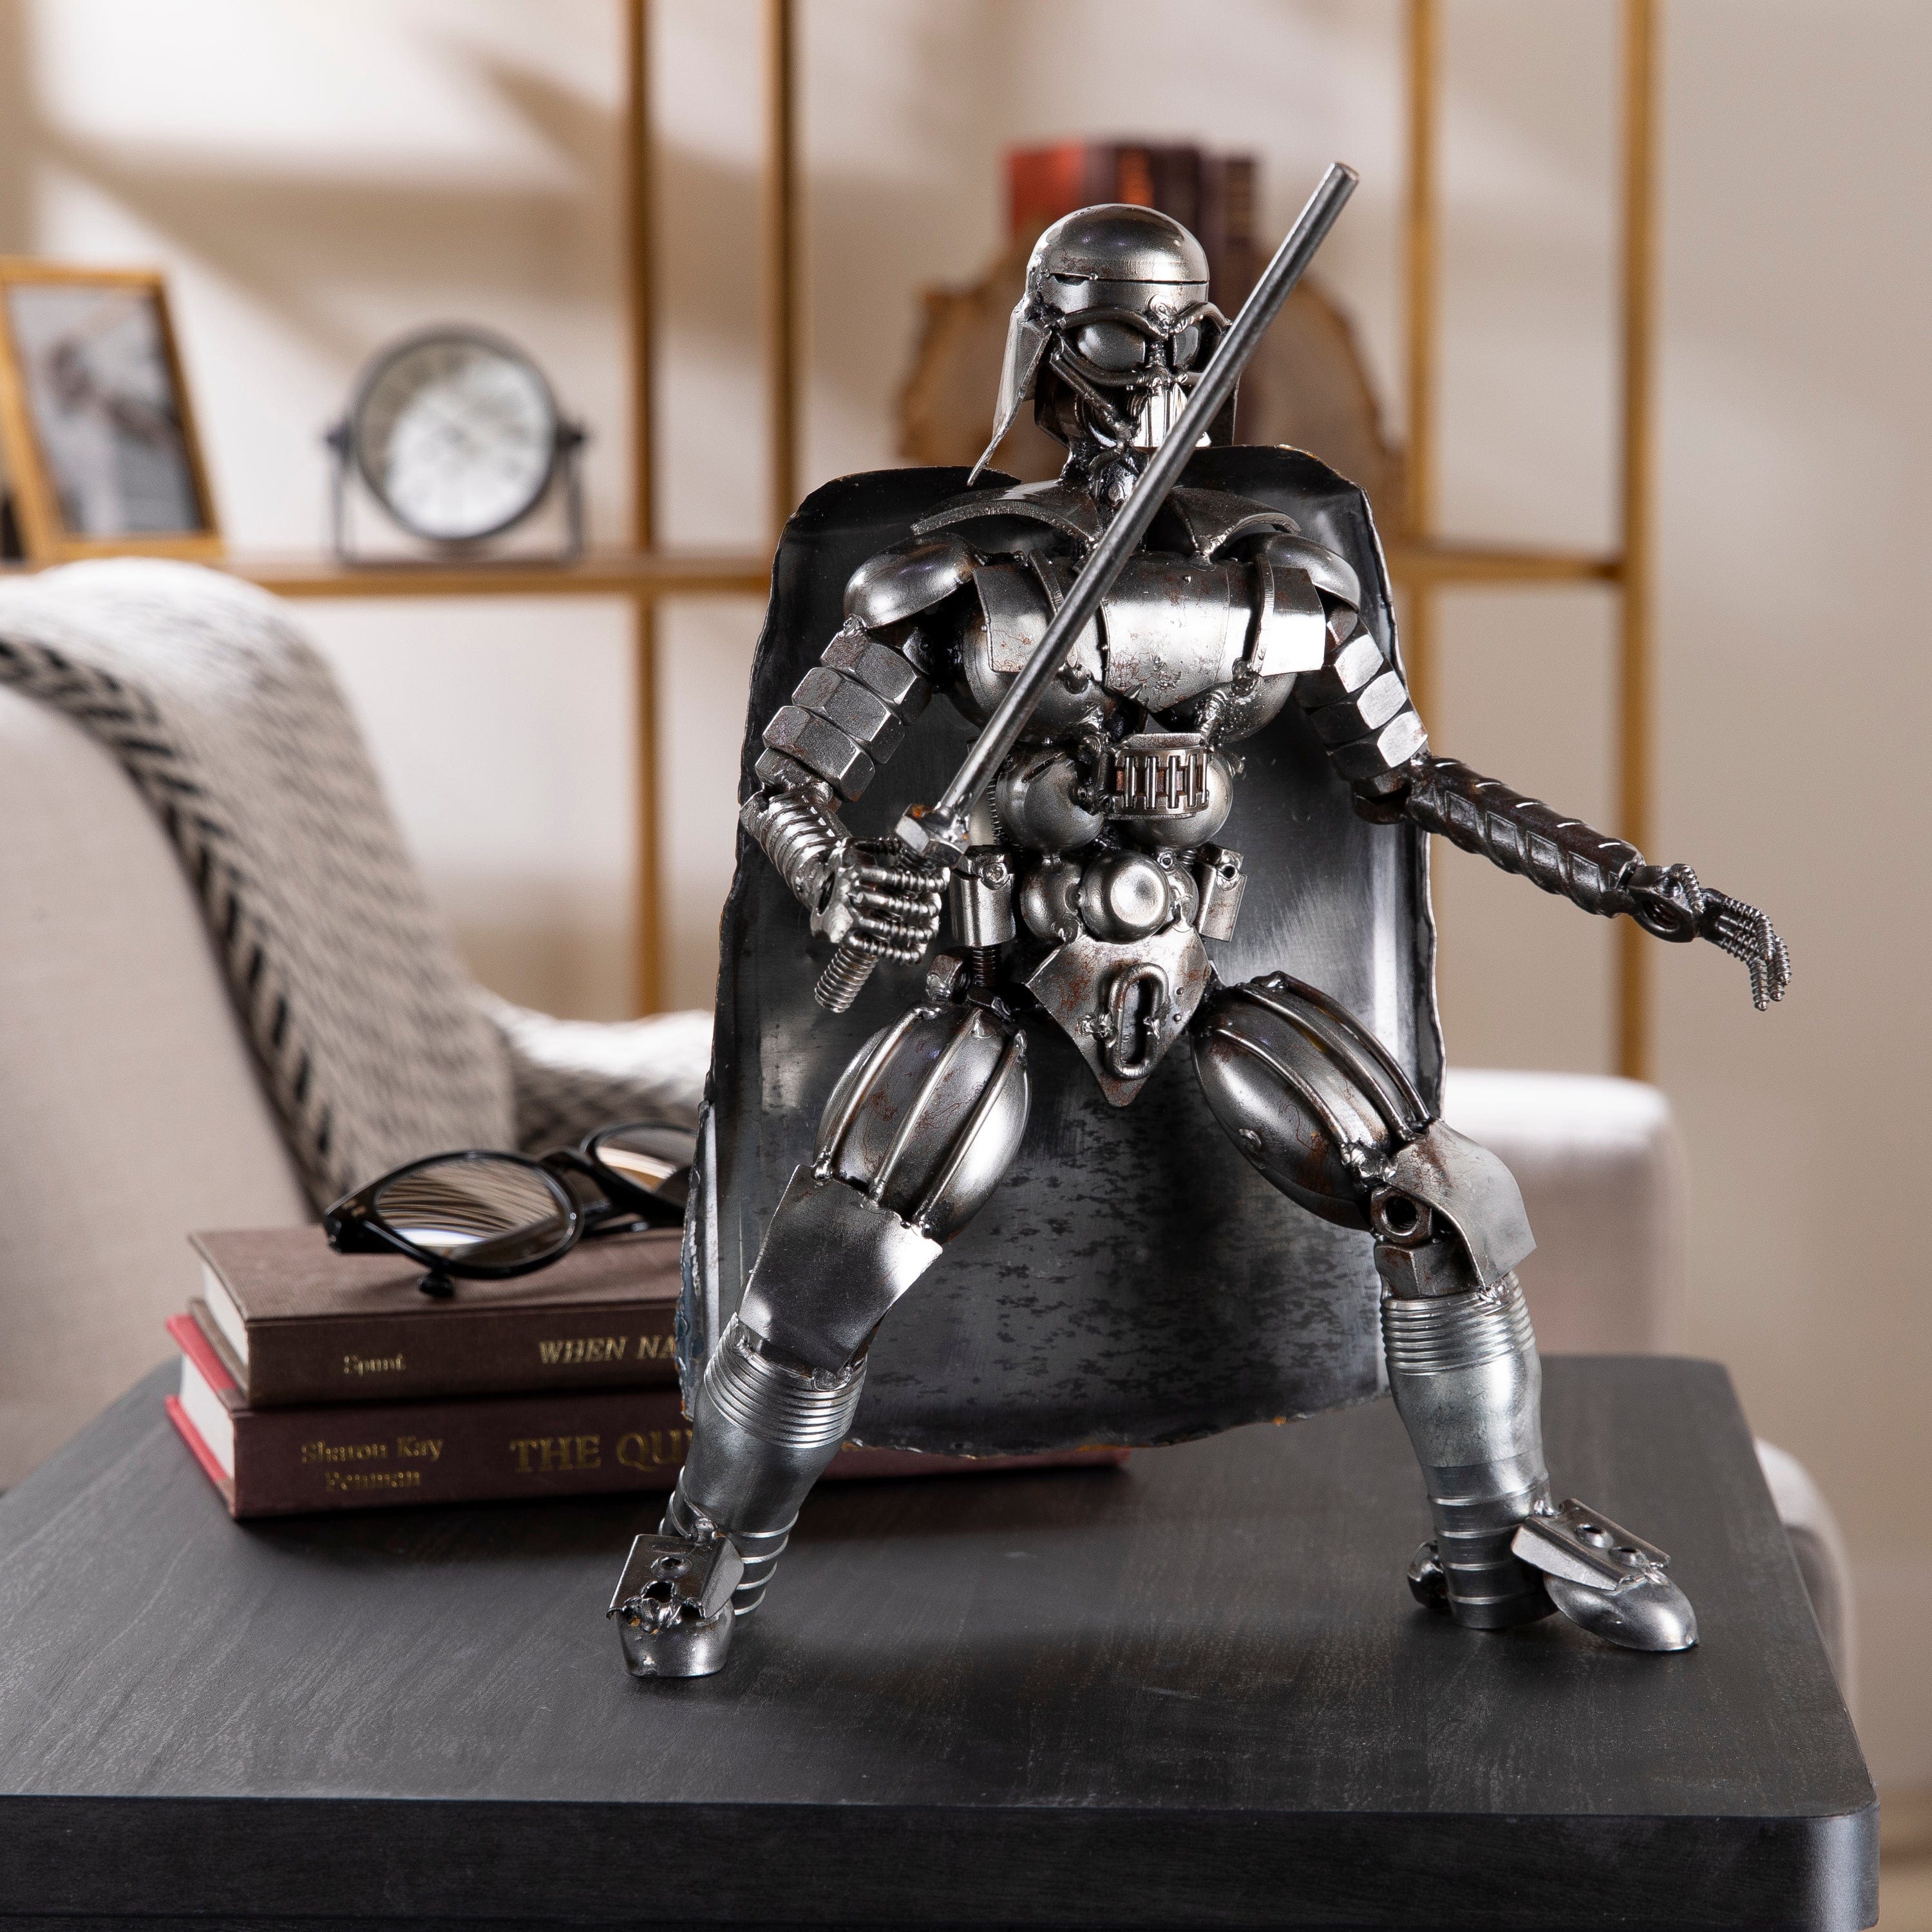 Kalifano Recycled Metal Art Darth Vader with Sword Inspired Recycled Metal Sculpture RMS-700DVA-N